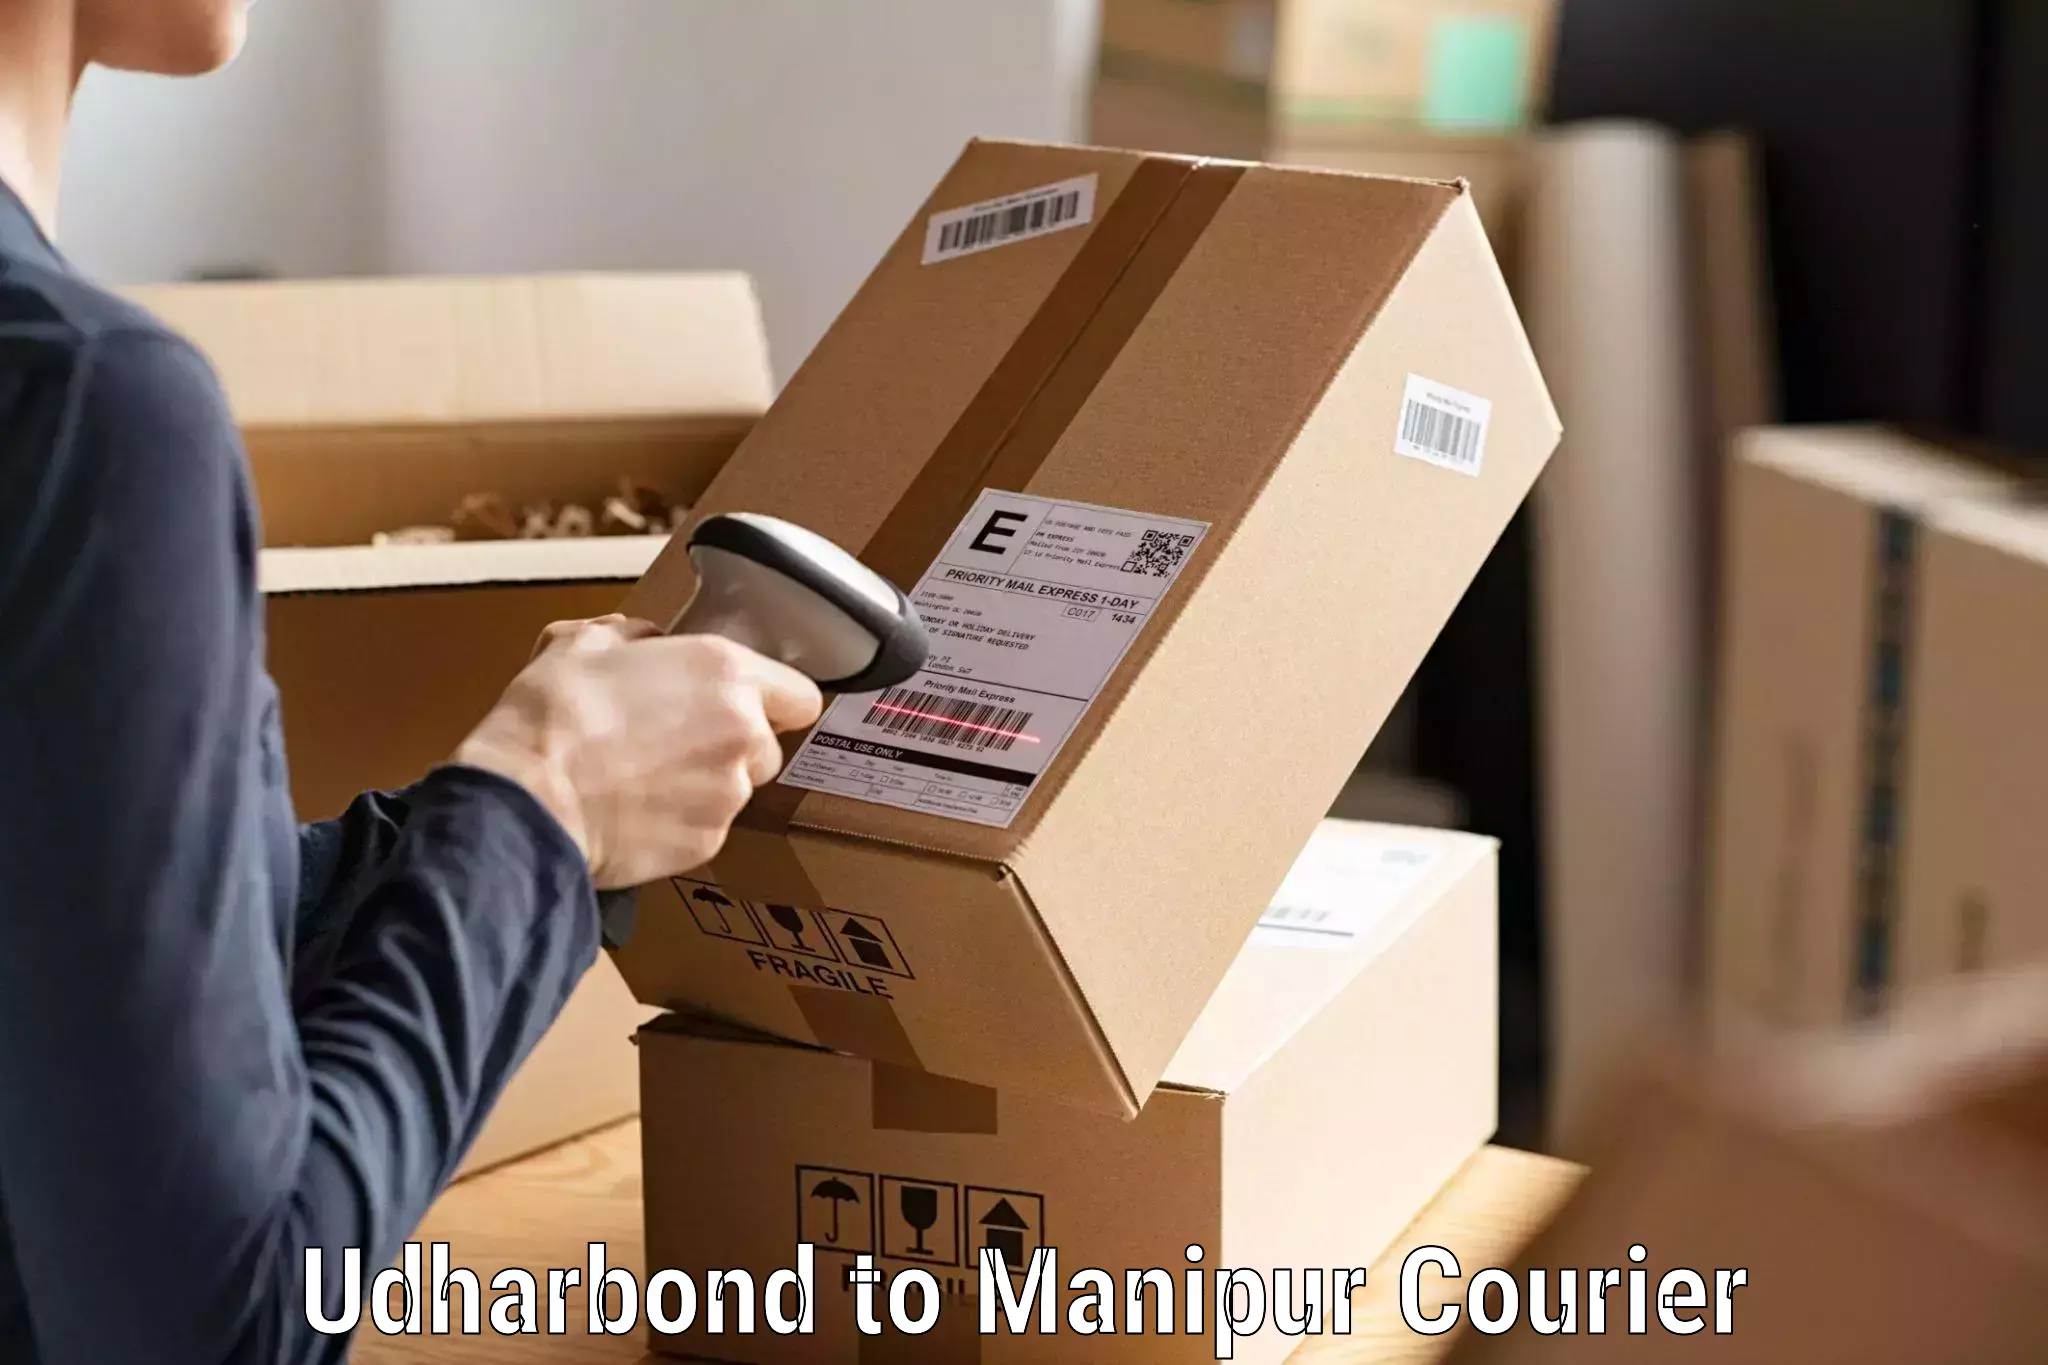 Enhanced tracking features Udharbond to Moirang